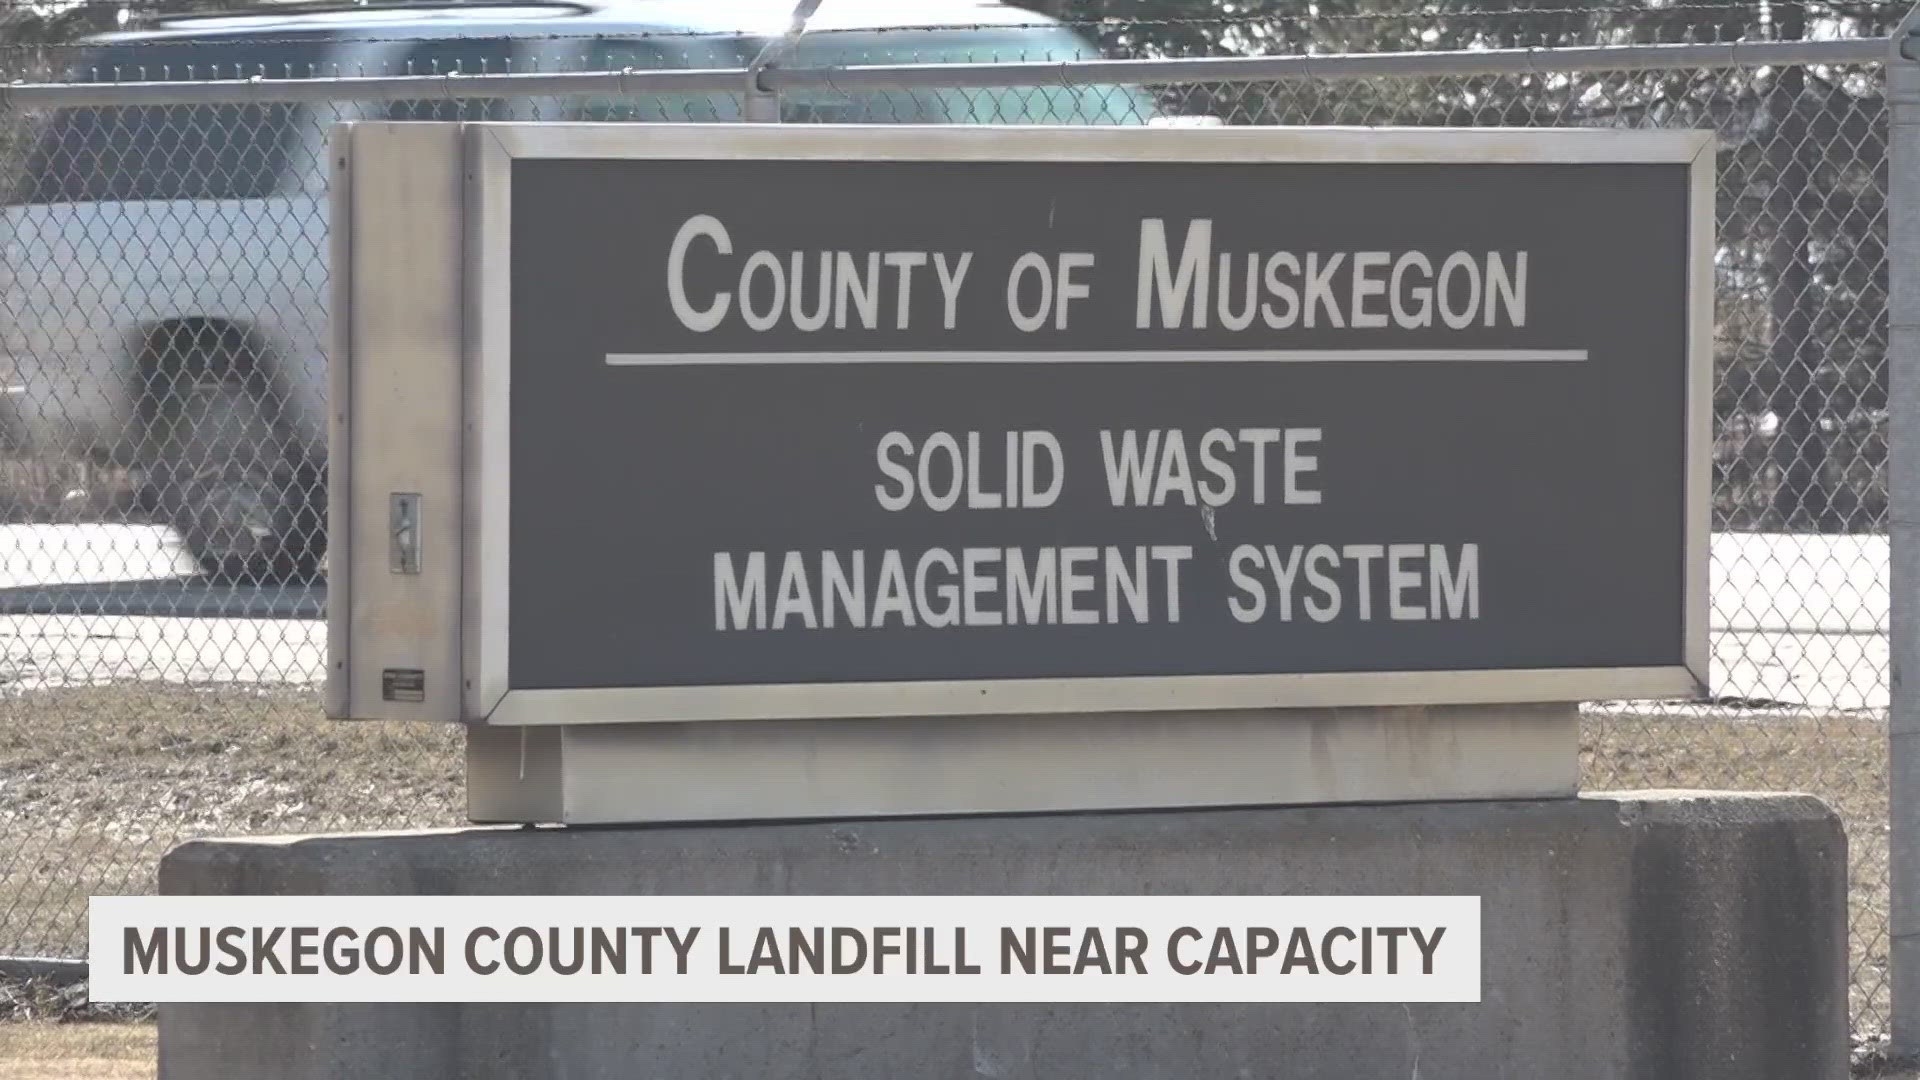 Some in Muskegon County are asking questions after a Facebook post said the County's landfill is out of space.